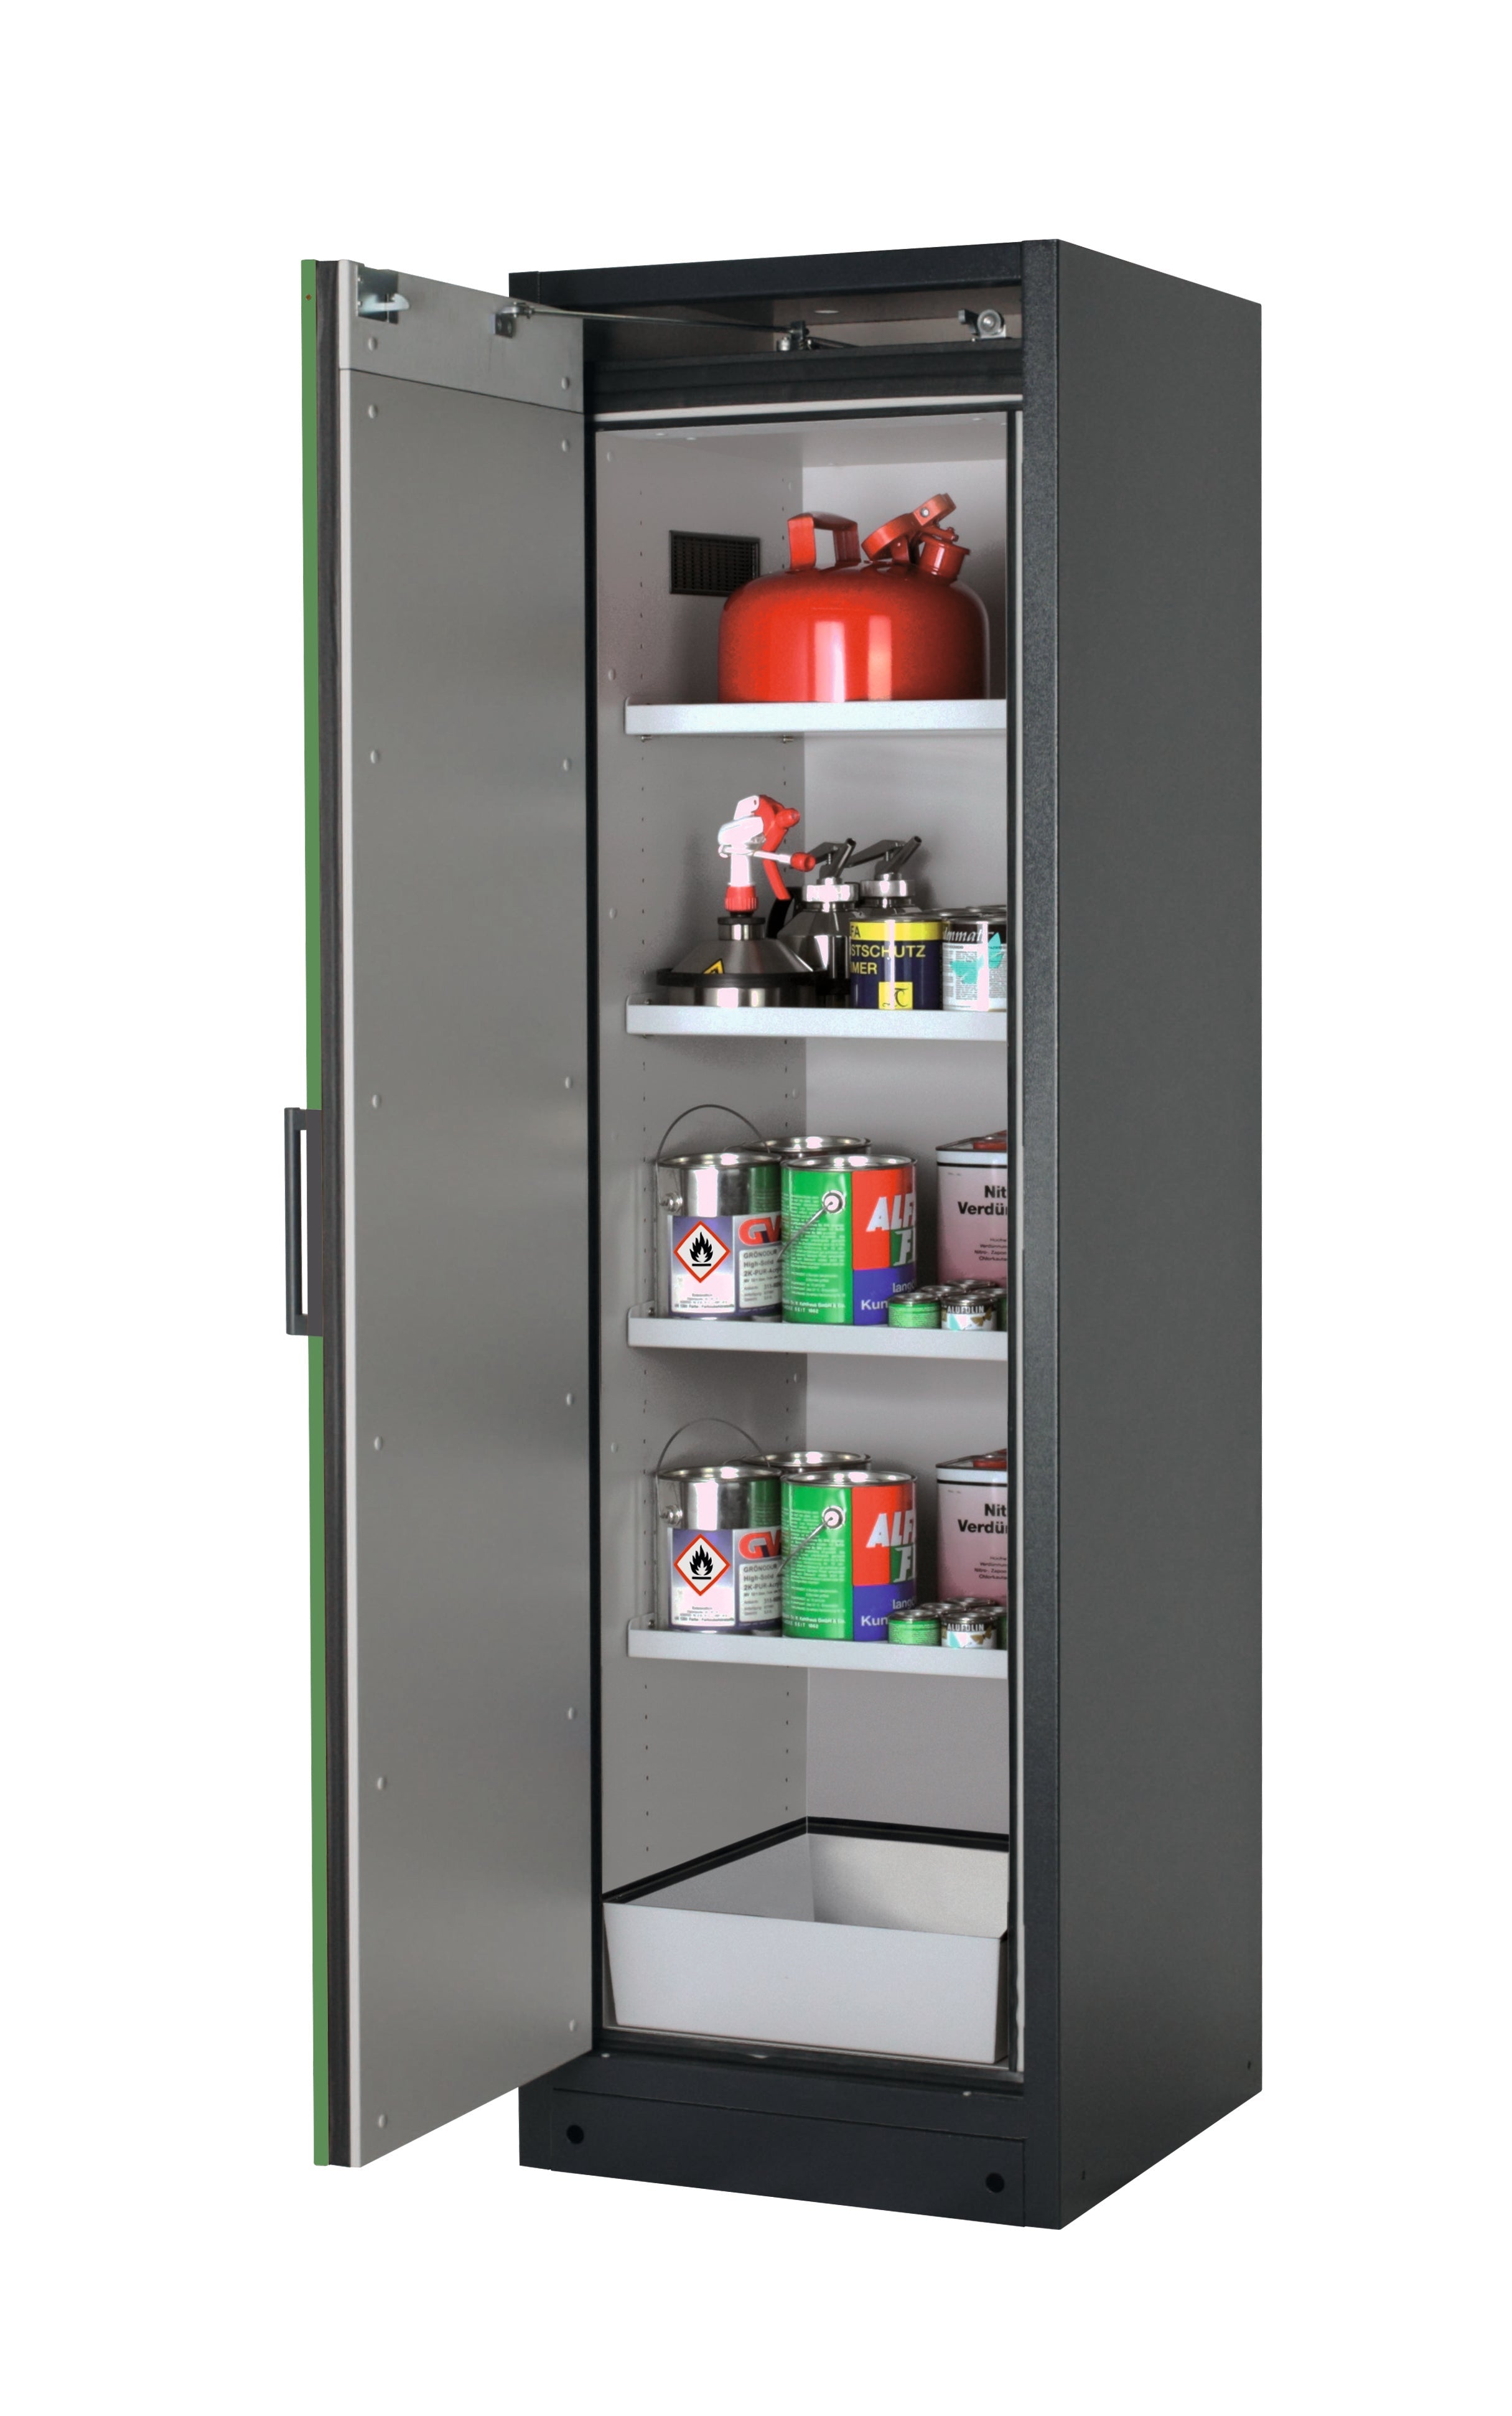 Type 90 safety storage cabinet Q-CLASSIC-90 model Q90.195.060 in reseda green RAL 6011 with 4x shelf standard (sheet steel),